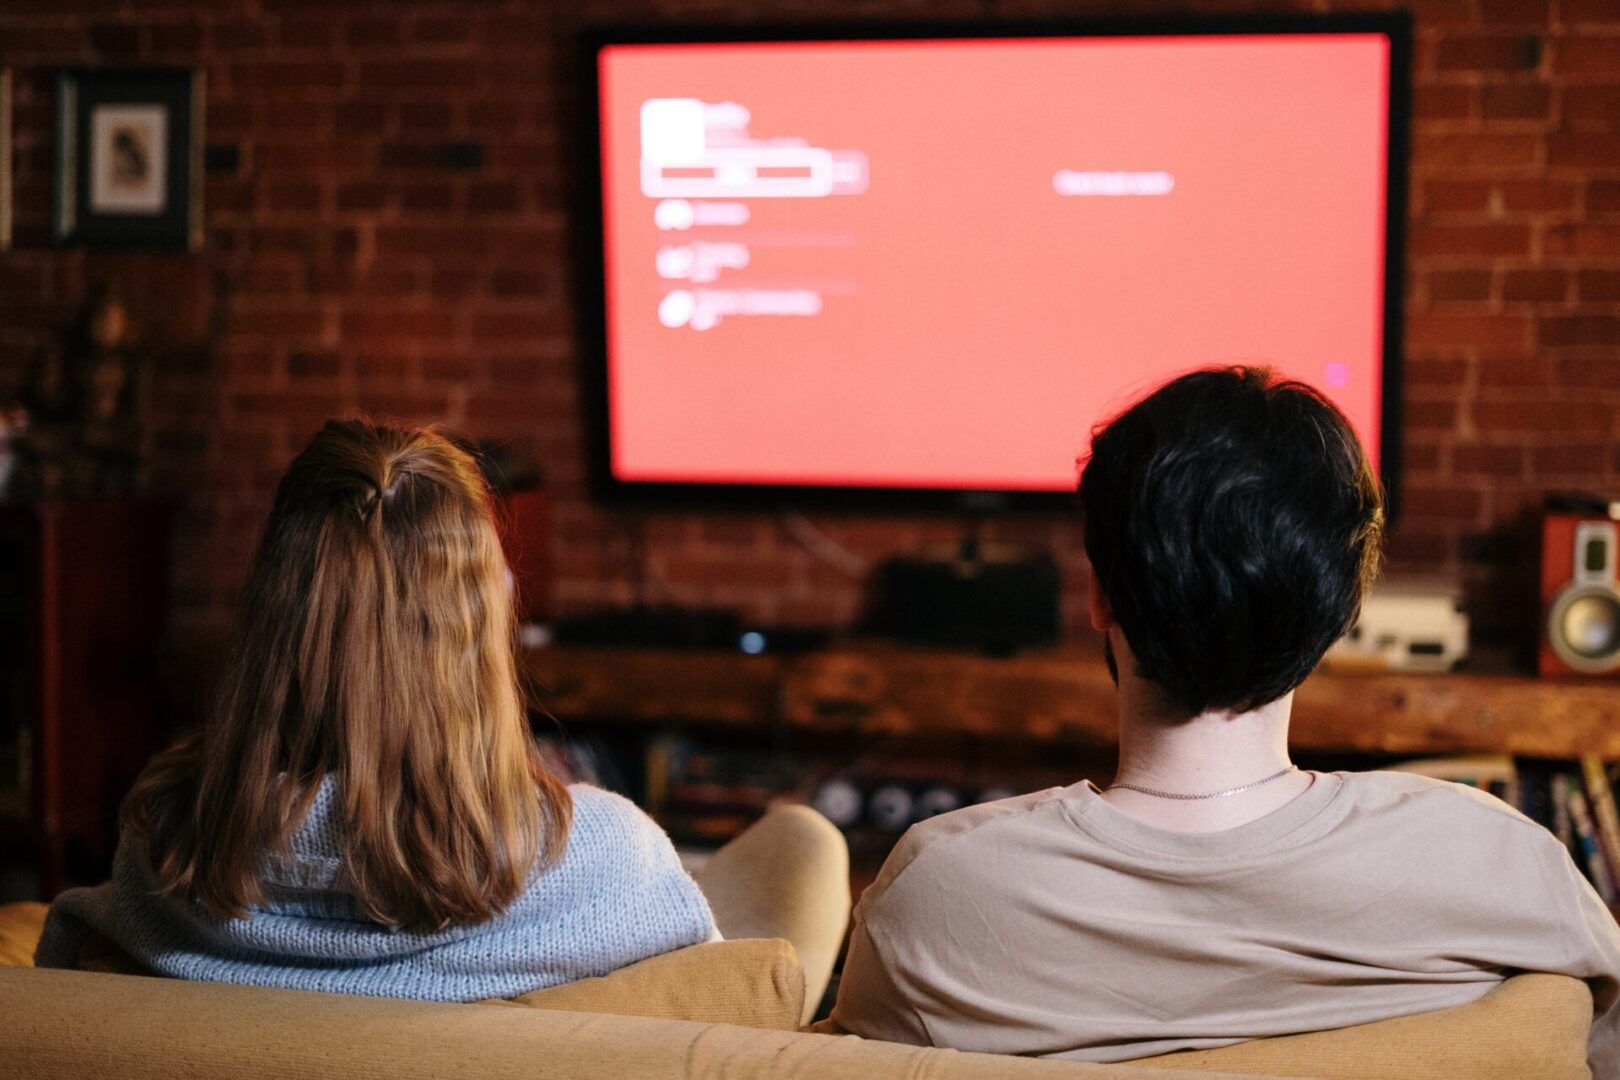 Verifying Impressions across Connected TV as Ad Fraud Rises